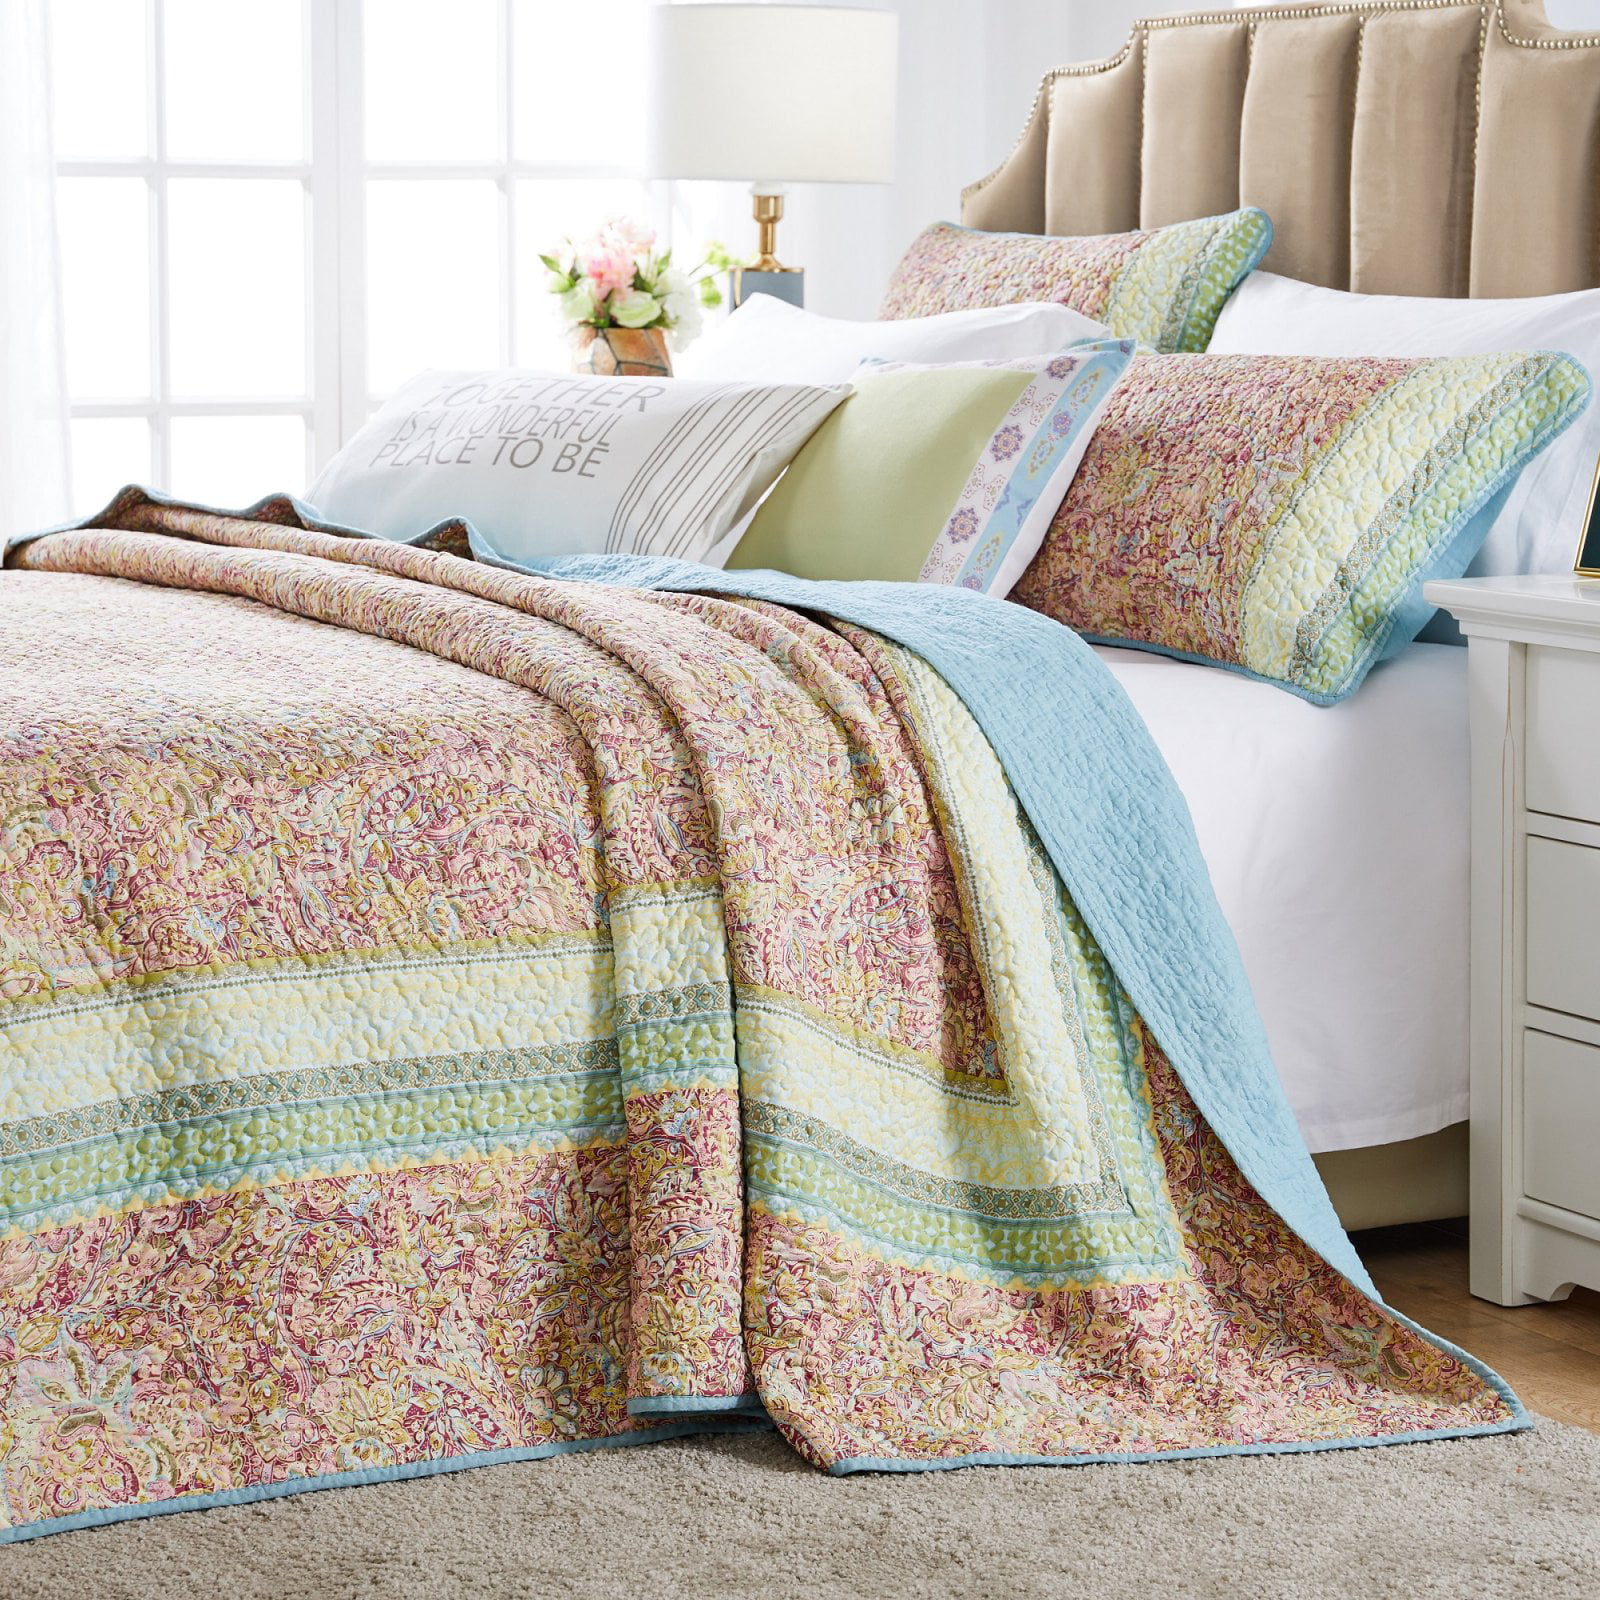 Details about   Barefoot Bungalow Topanga Quilt Set 3-Piece Full/Queen Multi 